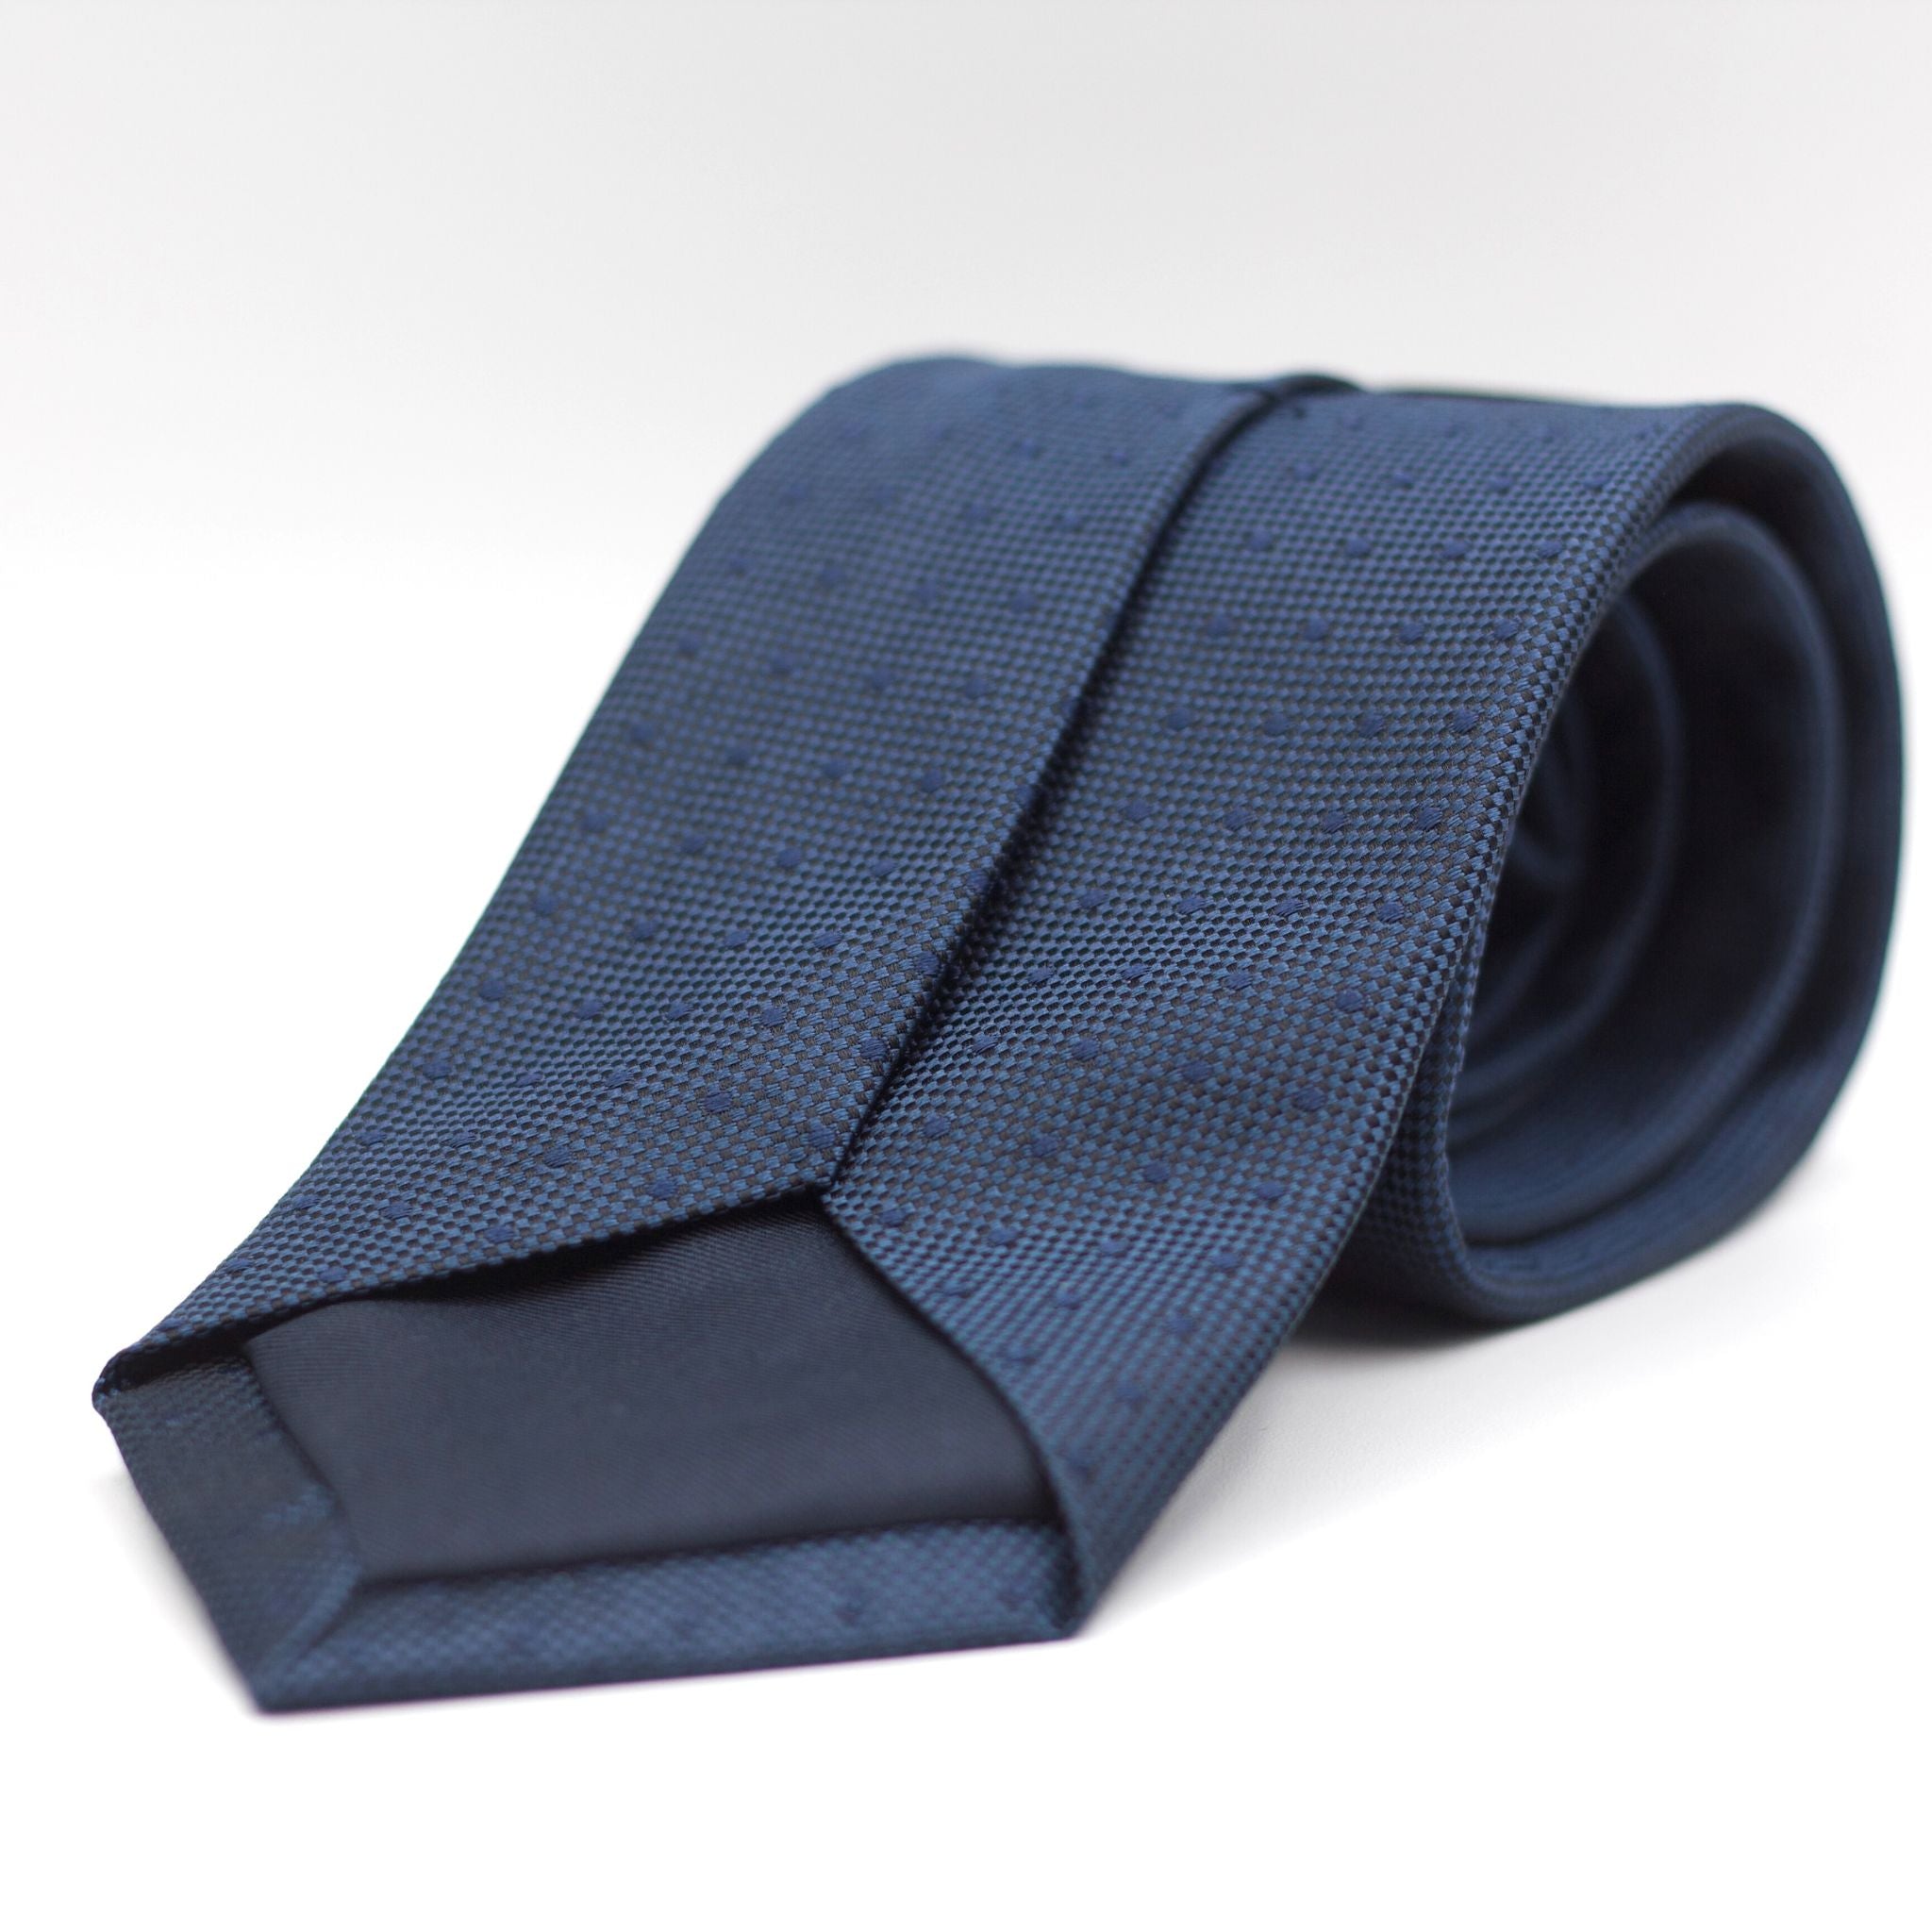 Olympic Blue with Olympic Blue dots tie